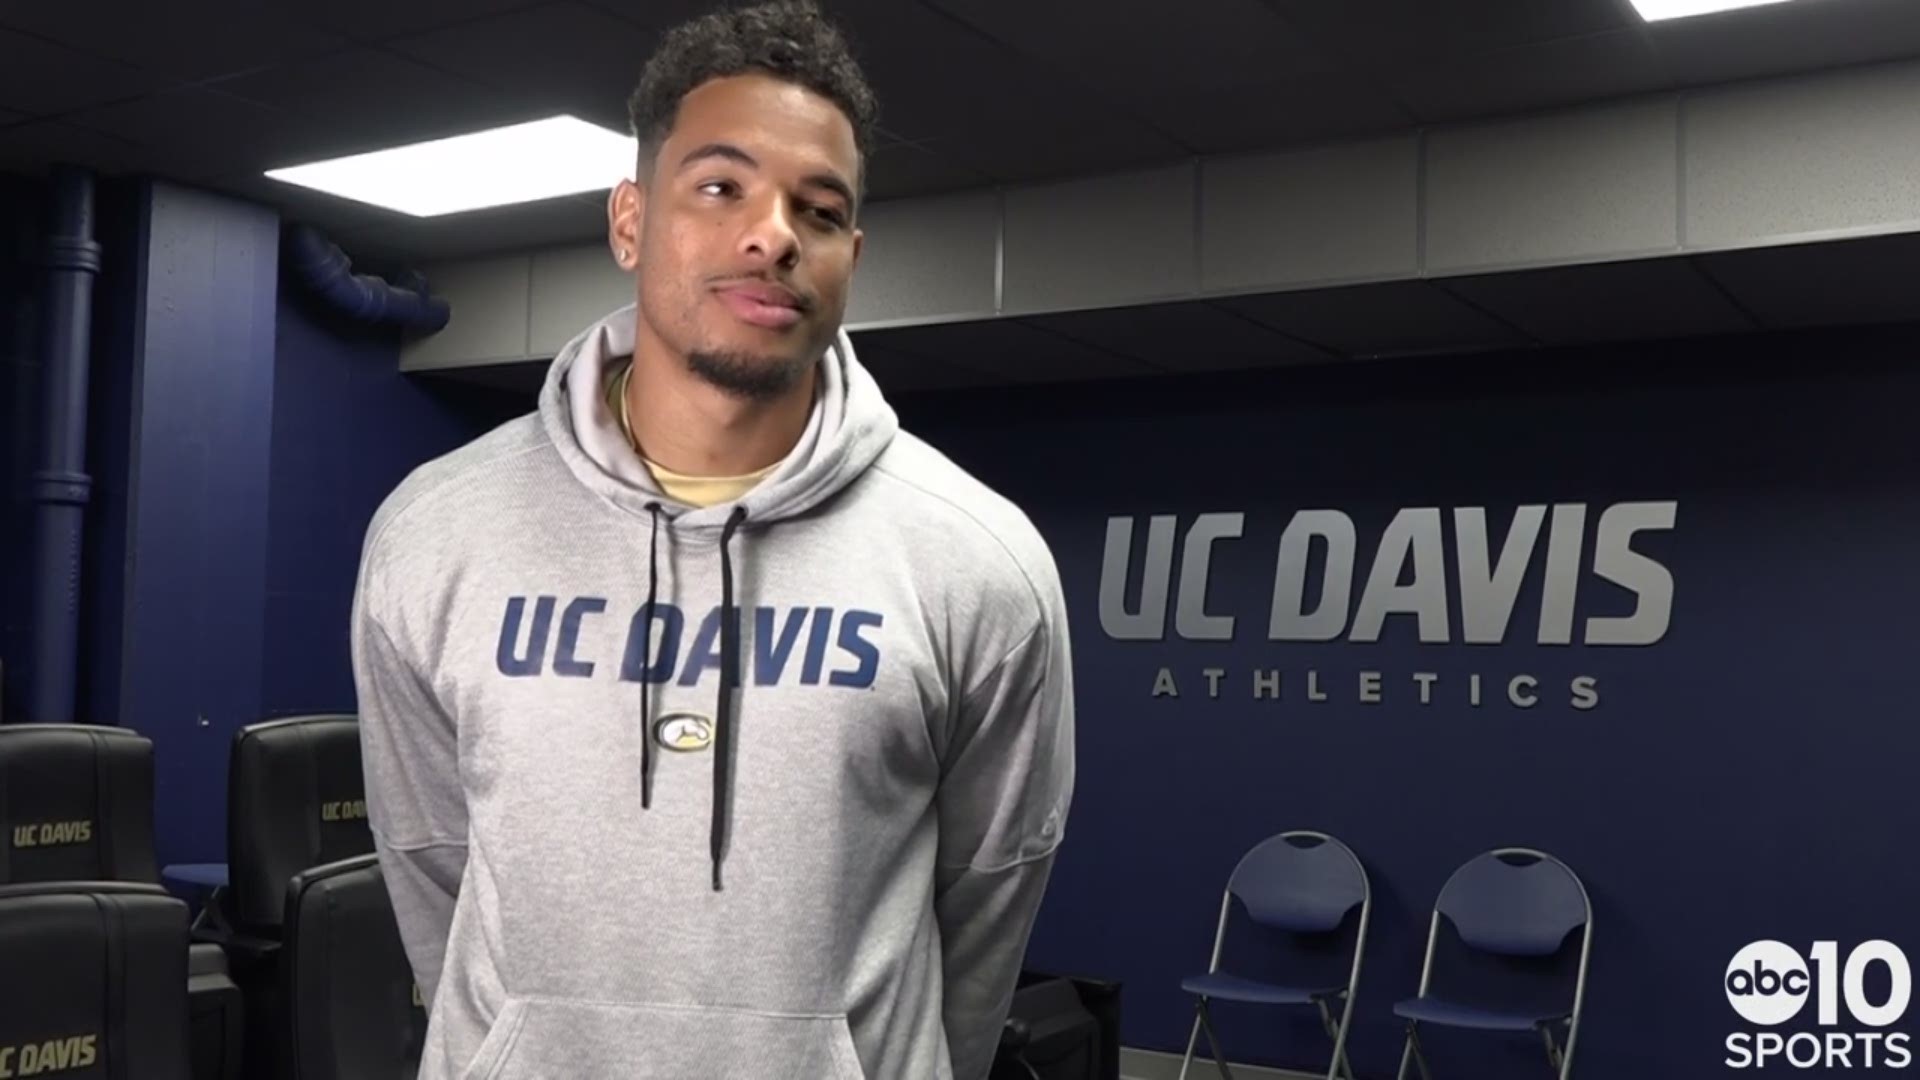 UC Davis wide receiver Keelan Doss talks to ABC10's Sean Cunningham about his four years with the Aggies, turning his attention to the NFL Draft, his experience at the NFL Combine and his experience with Raiders head coach Jon Gruden at the Senior Bowl.